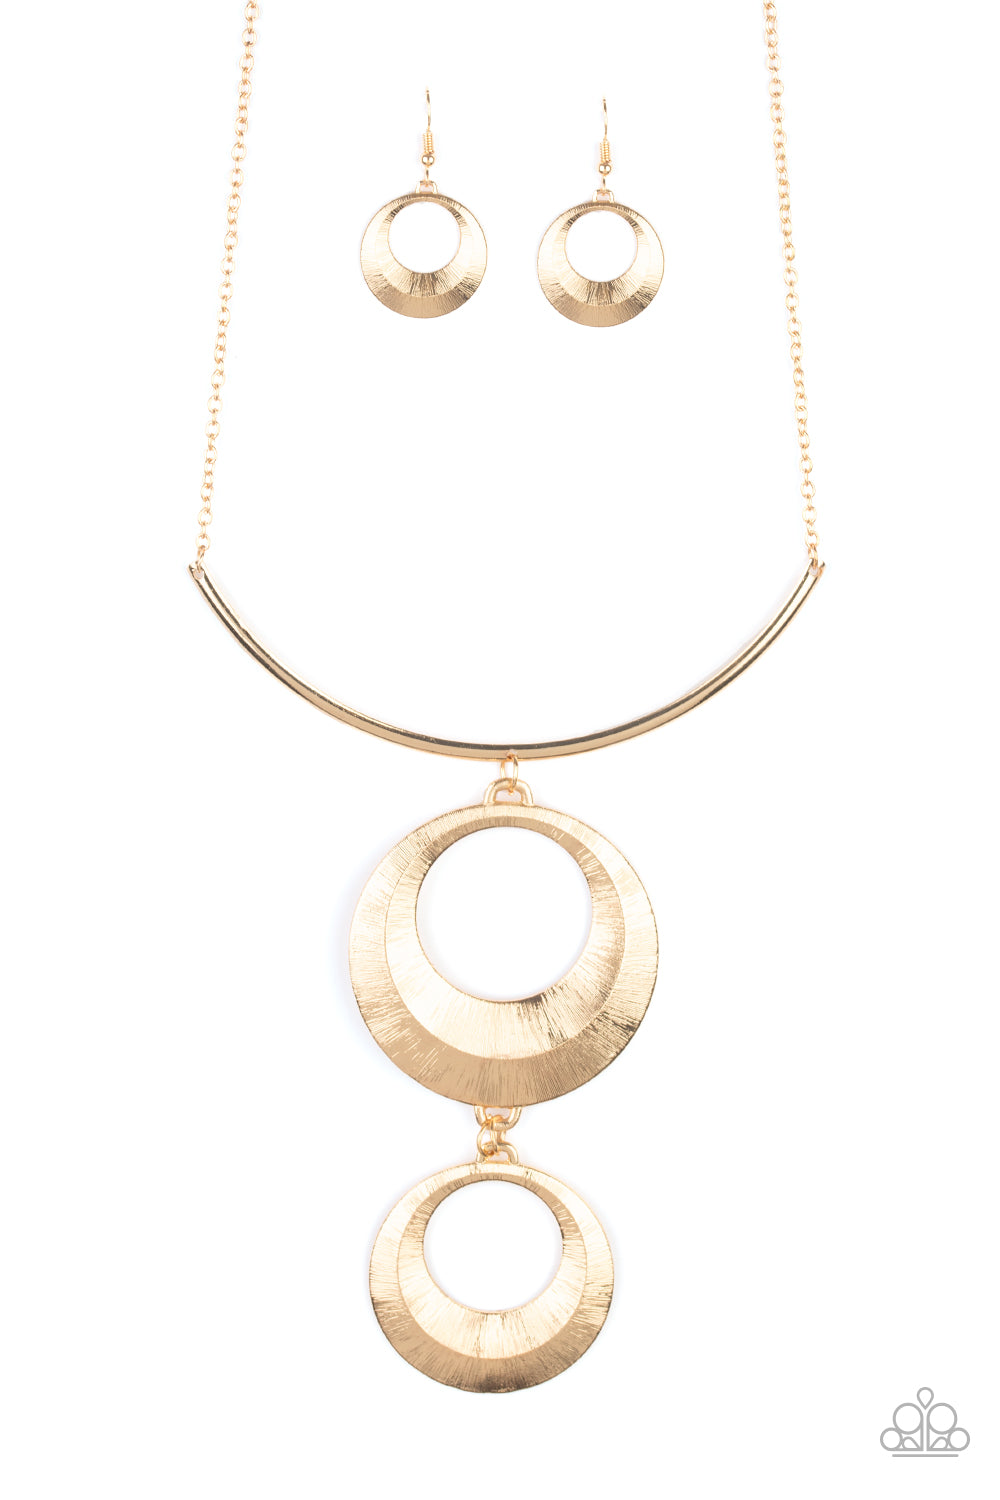 Egyptian Eclipse Gold Necklace - Daria's Blings N Things